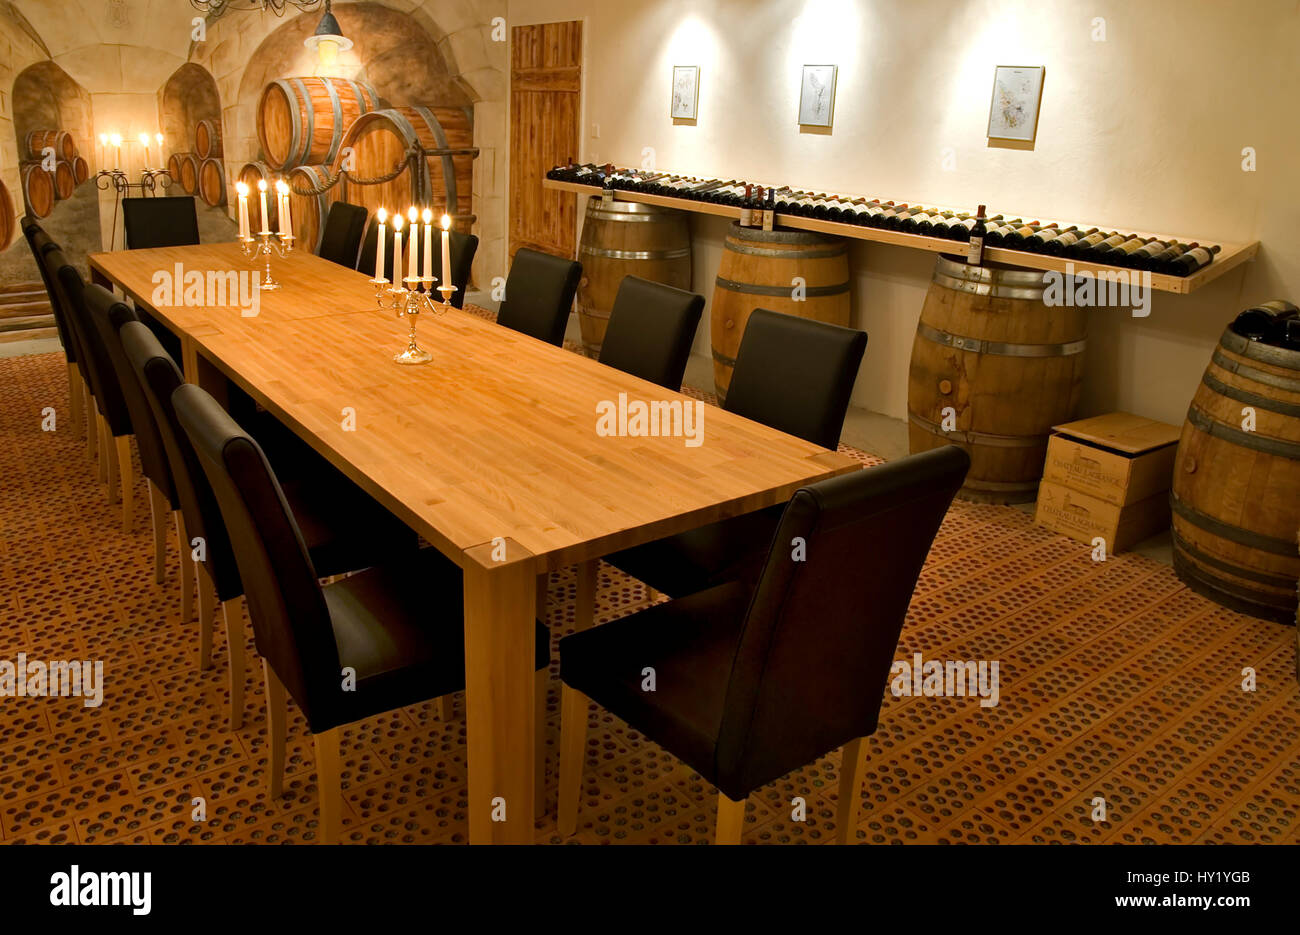 This stock photo shows a exclusive Wine Gallery in a Hotel which is used for wine tasting sessions and storage of exclusive wine varities. Stock Photo